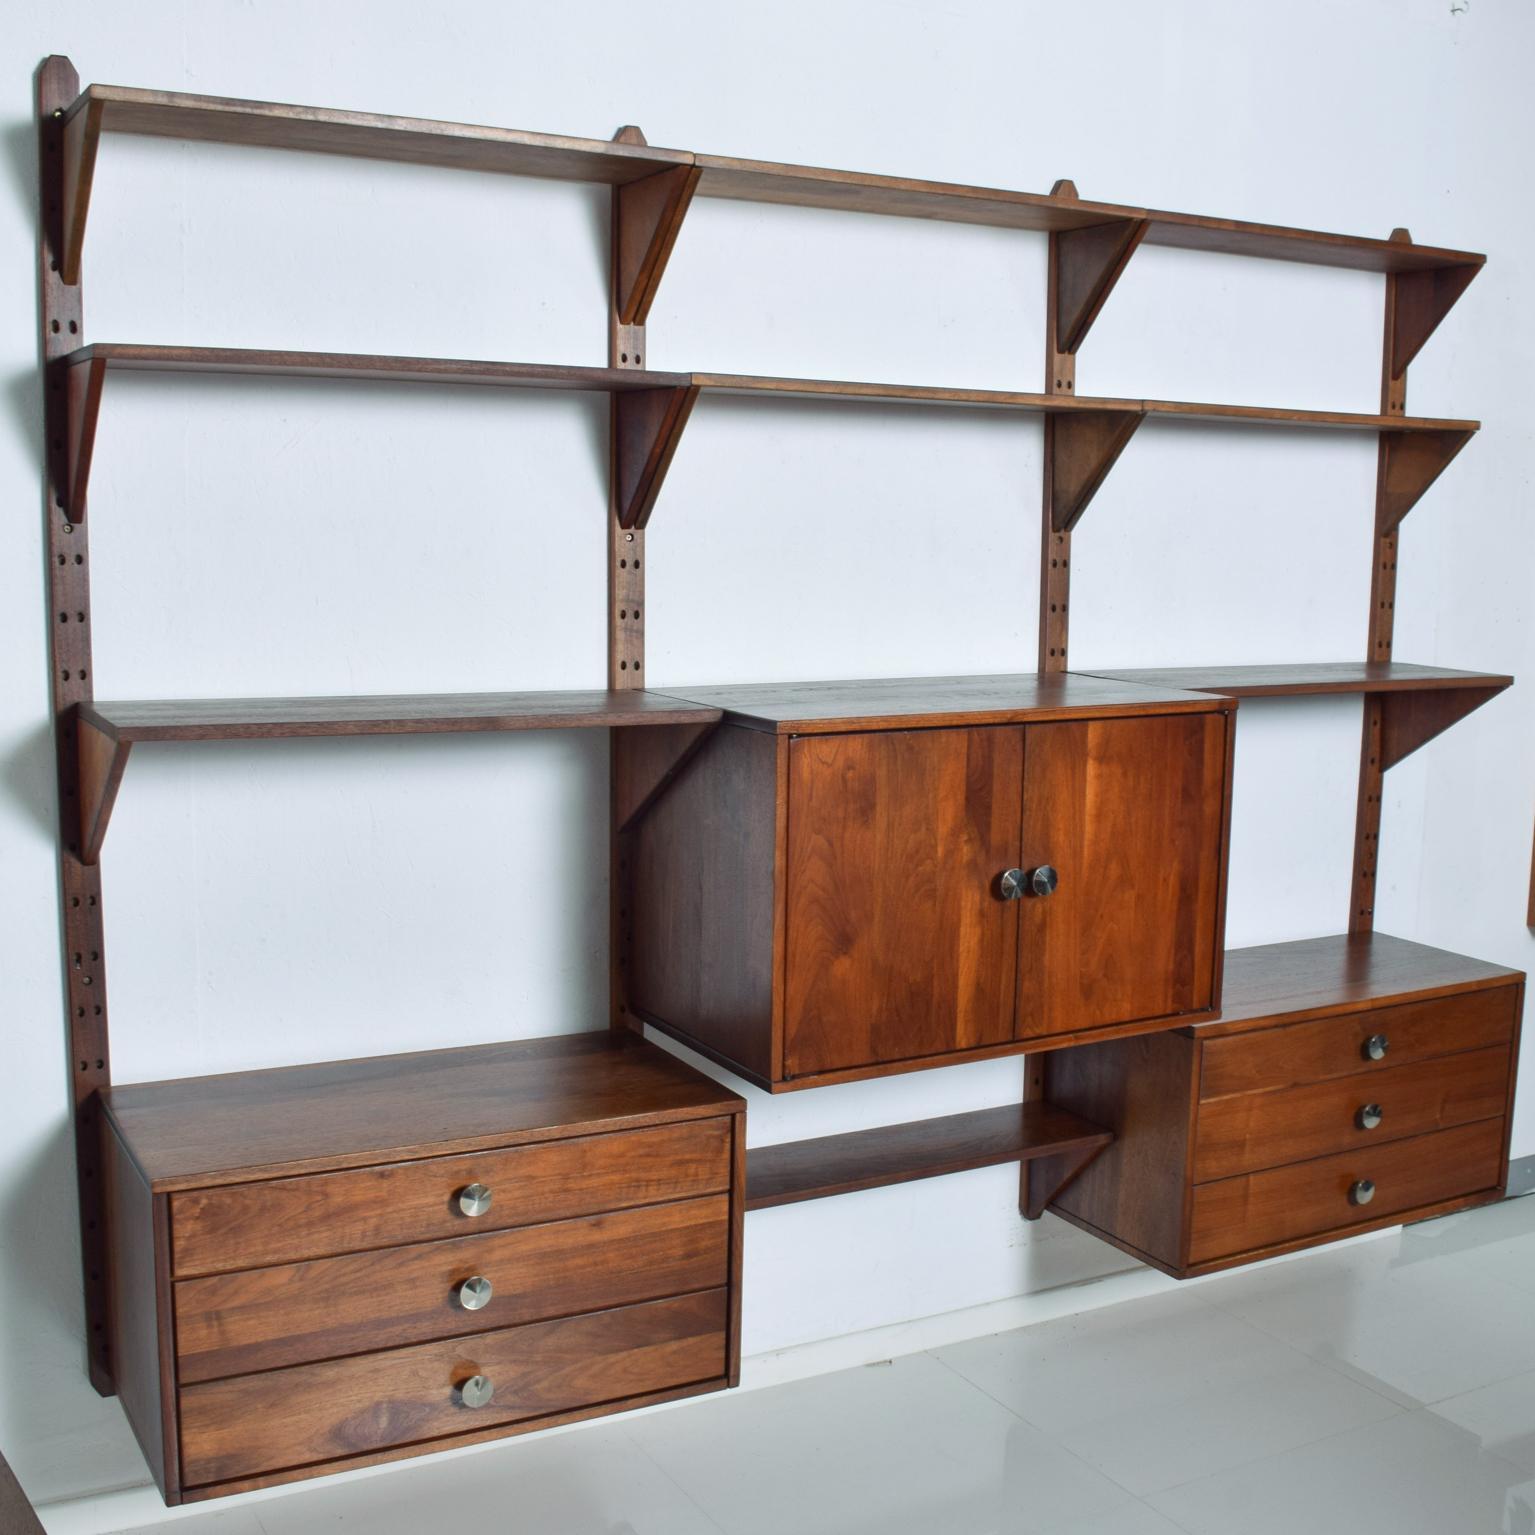 We are pleased to offer for your consideration, a beautiful wall unit made in Solid Walnut wood. 3 Bay system similar to CADO construction. No label present from the maker. One large storage cabinet with shelf and two cabinets with pull out drawers.